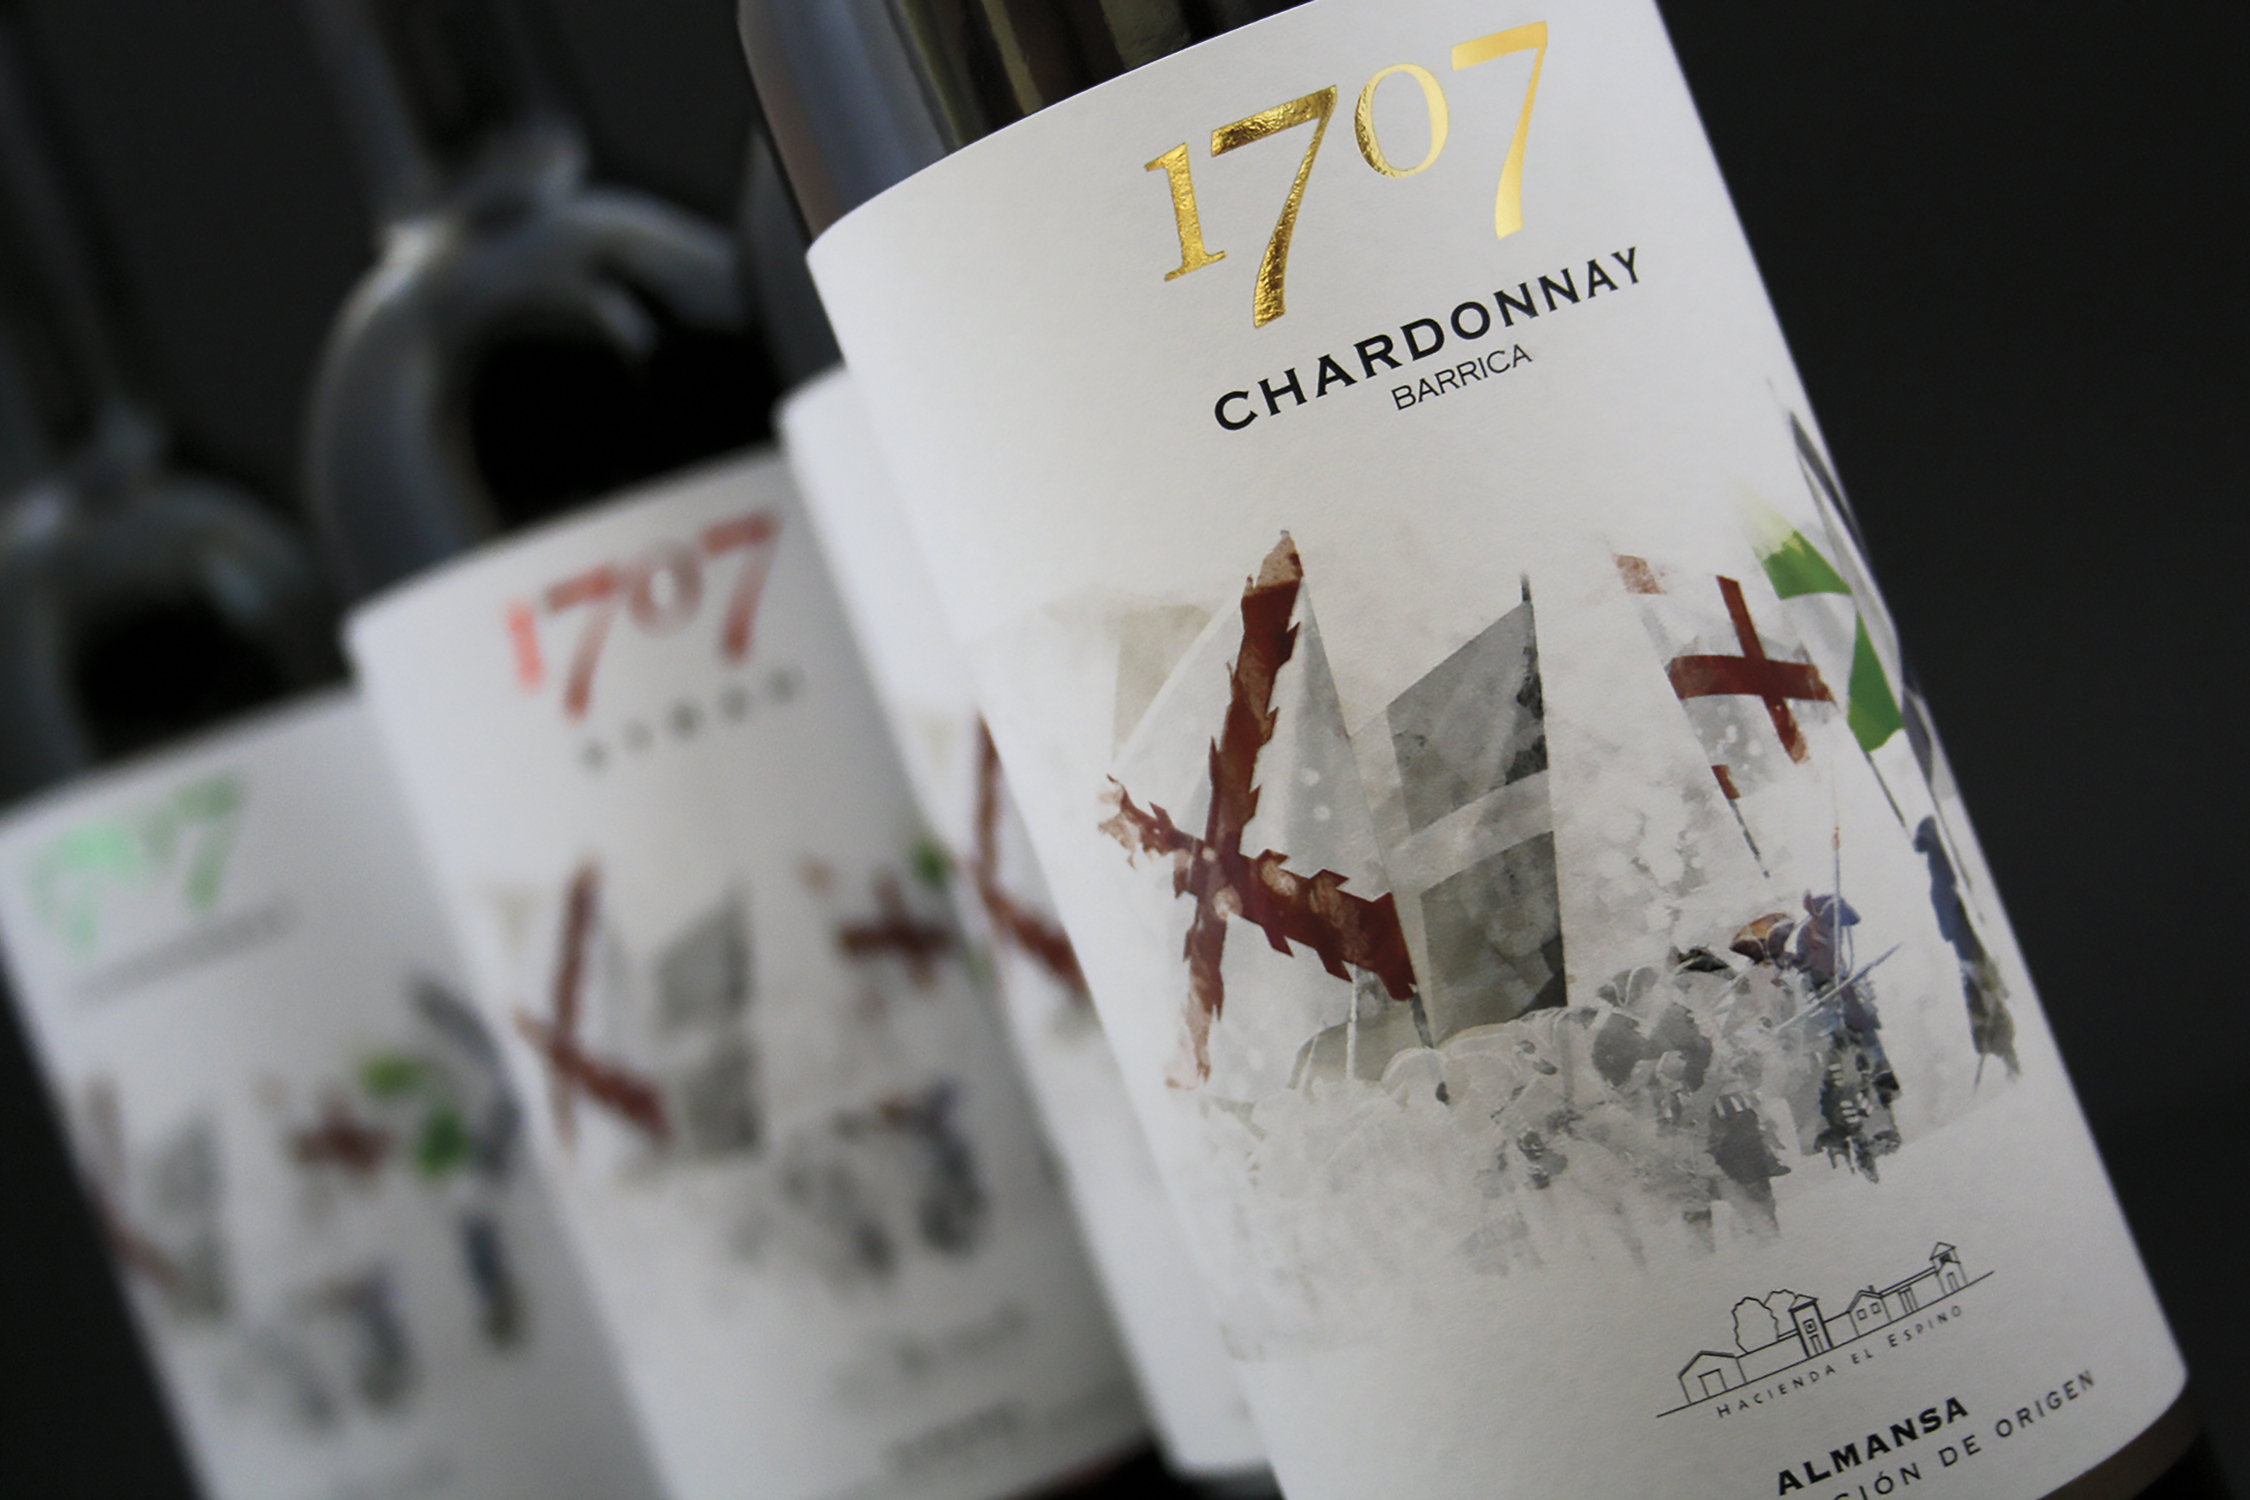 The Battle of Almansa in 1707 is the Back-Drop to this Illustrated Water Colour Wine Label